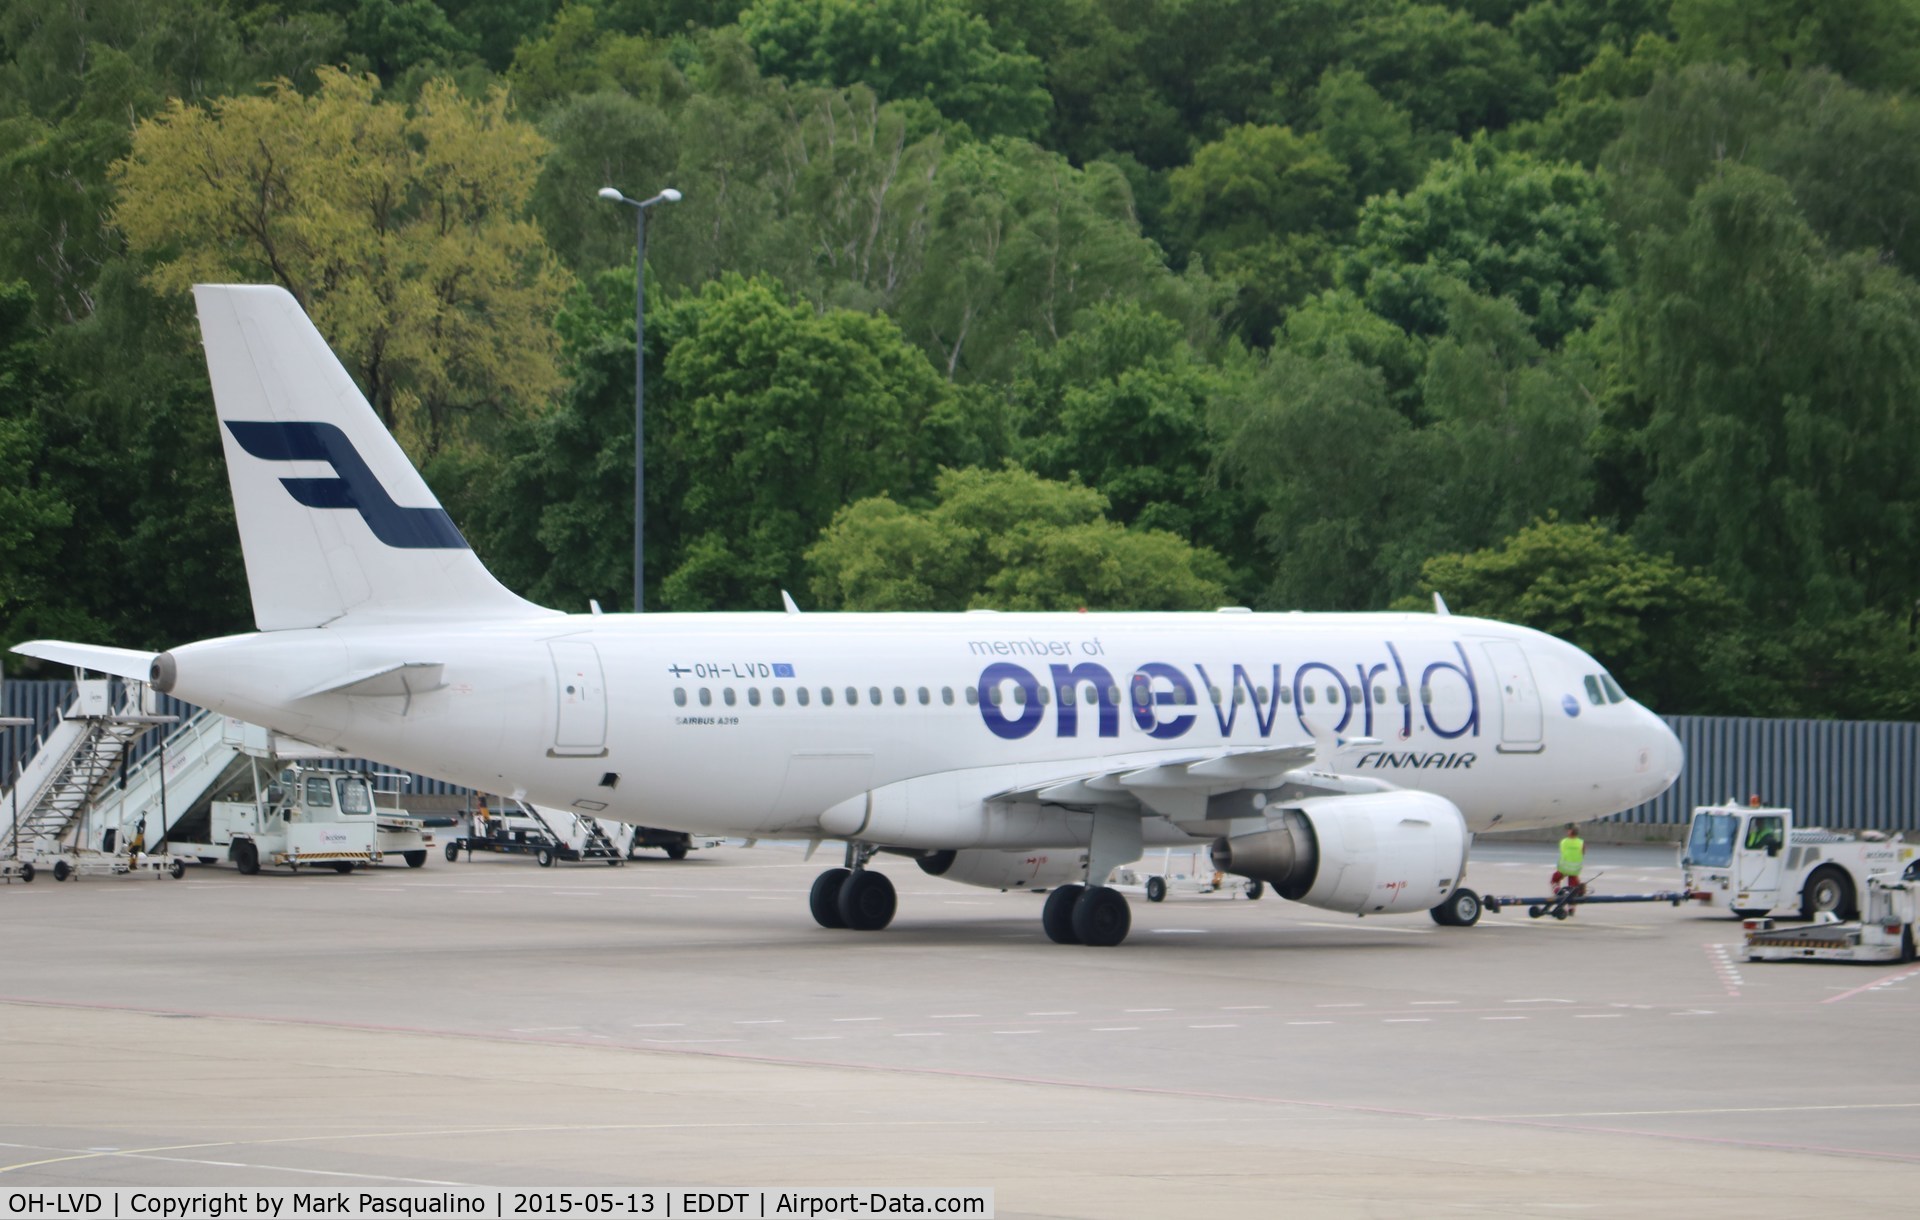 OH-LVD, 2000 Airbus A319-112 C/N 1352, Airbus A319